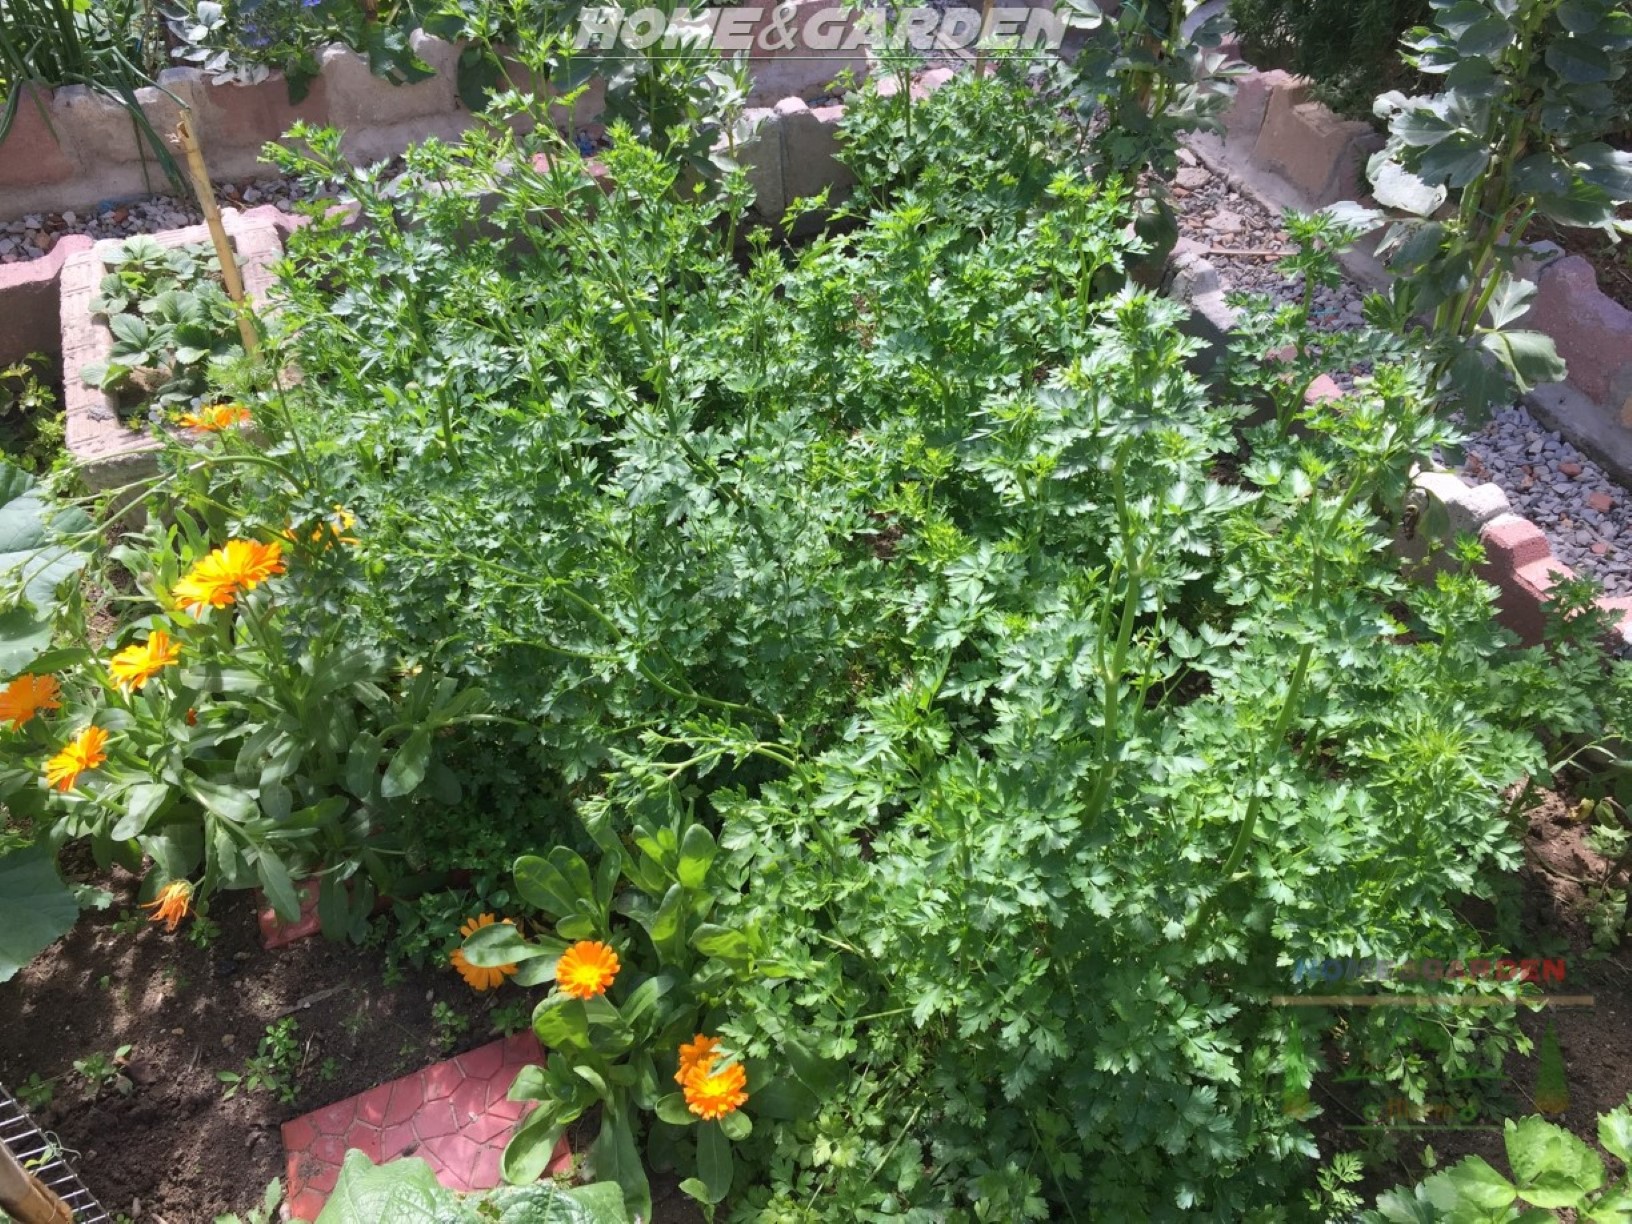 Planting parsley next to your tomatoes plants will attracts hoverflies that feed off the pests that attack the tomatoes.